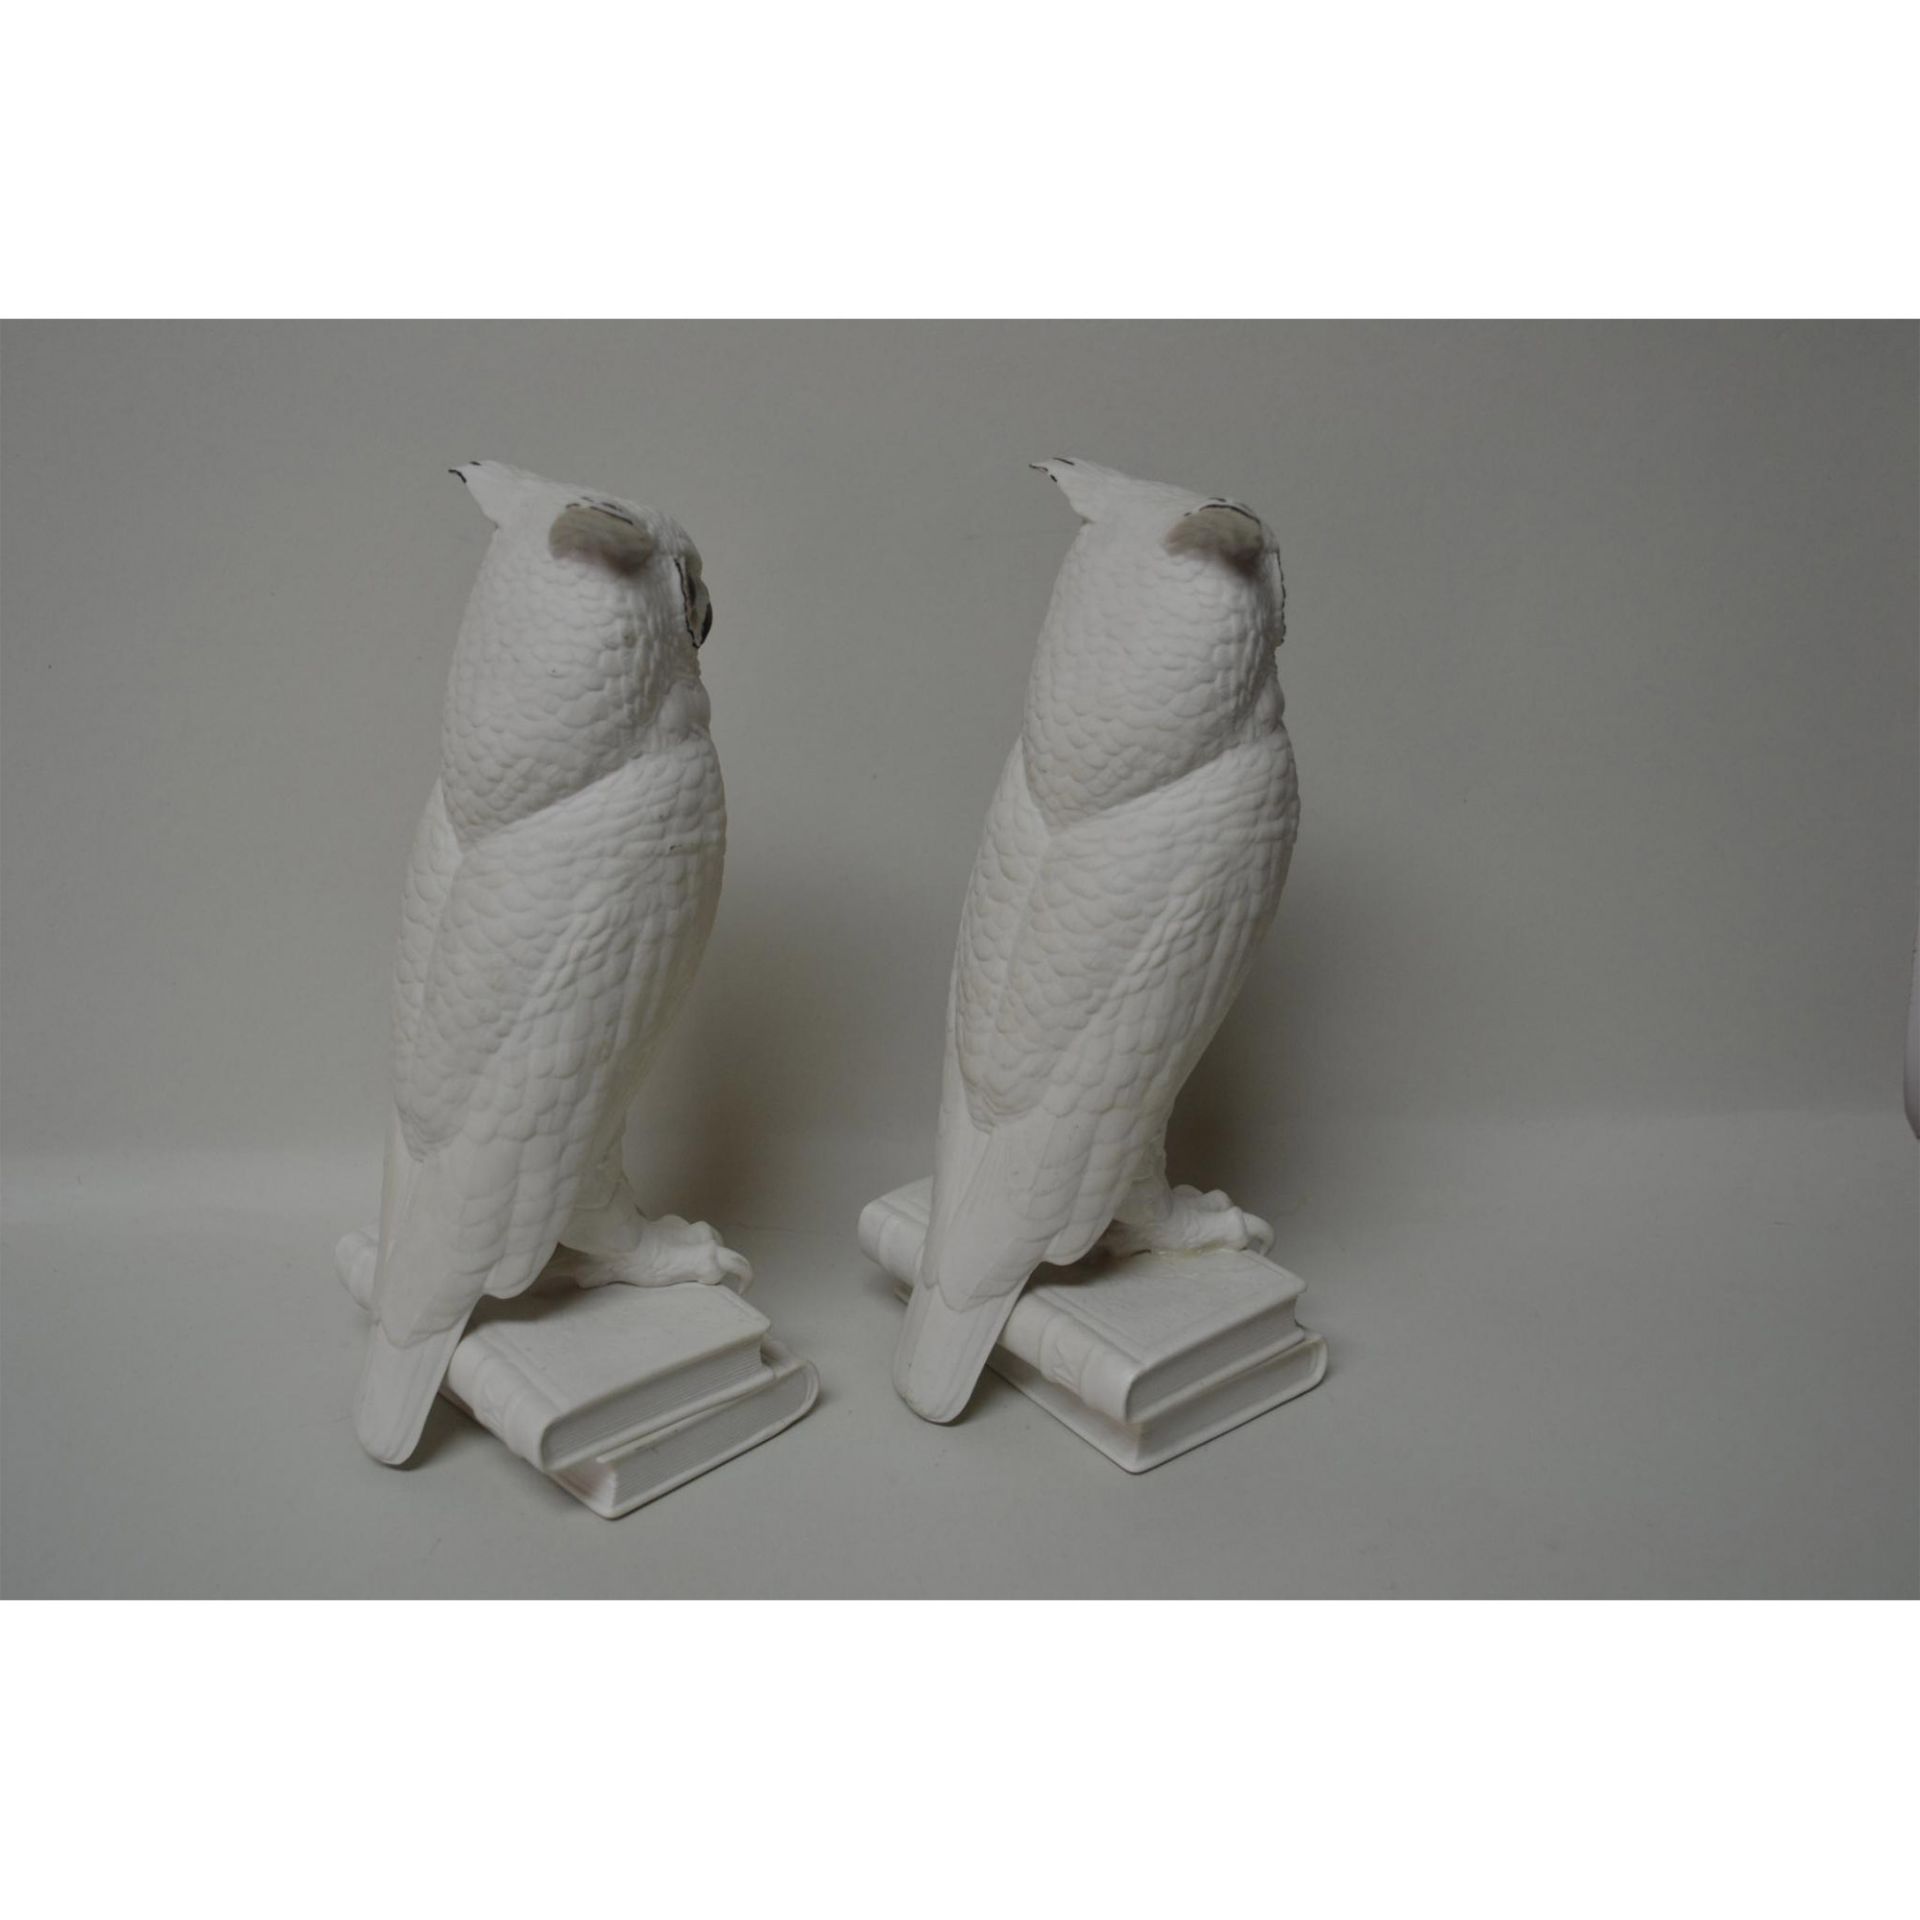 Boehm Porcelain Owl Bookends, Pair, Early, 1960 - Image 3 of 5